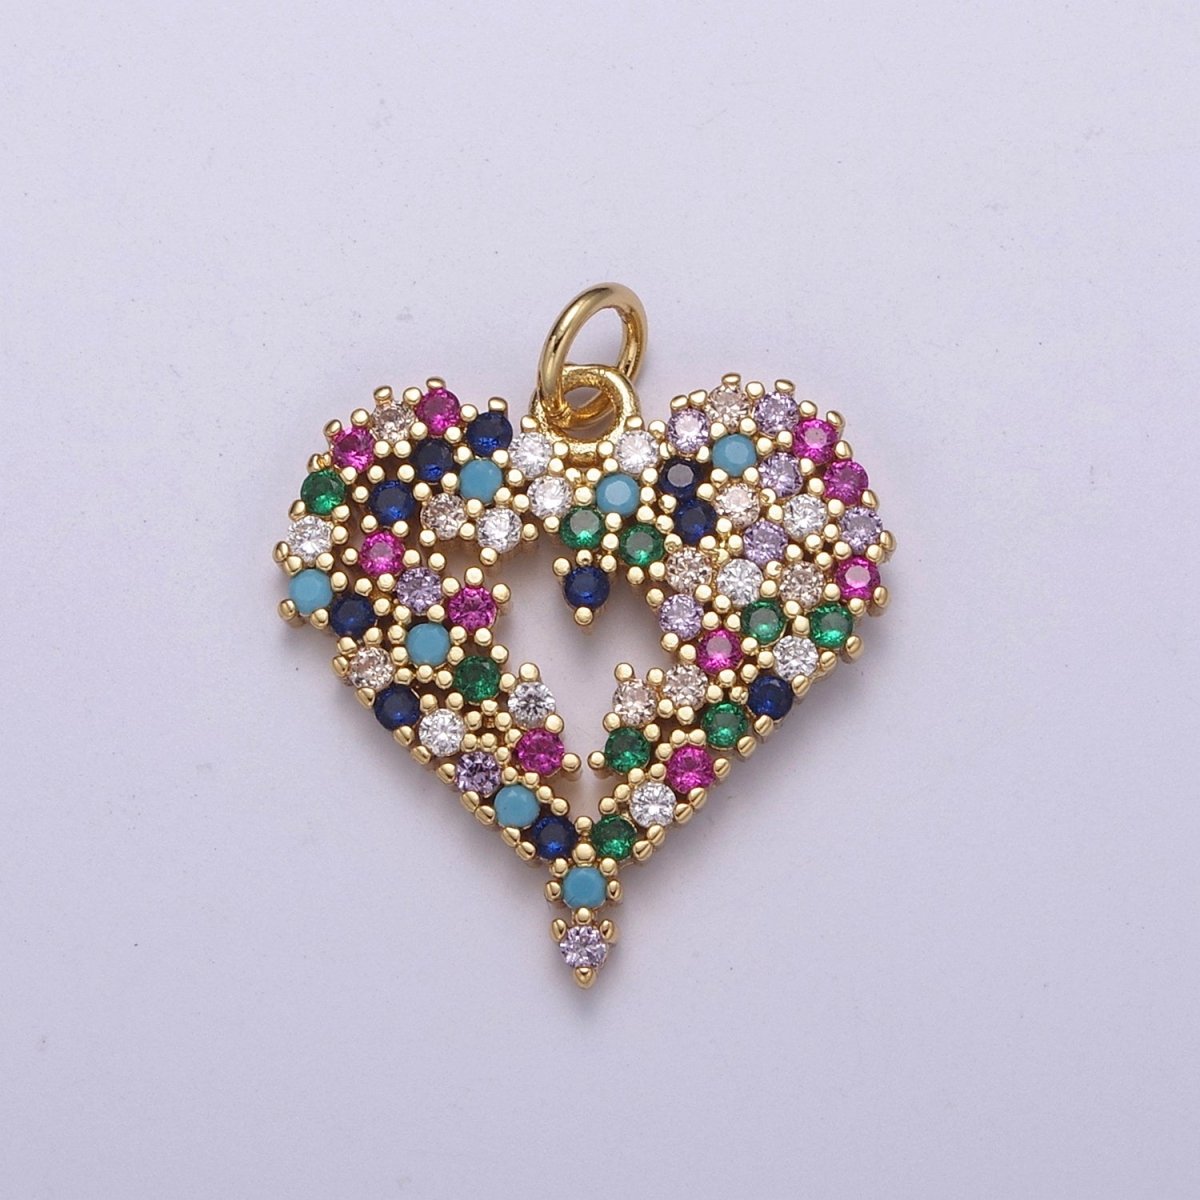 Dainty Multi Color Cz Heart Charm for Necklace Earring Bracelet Supply C-200 - DLUXCA